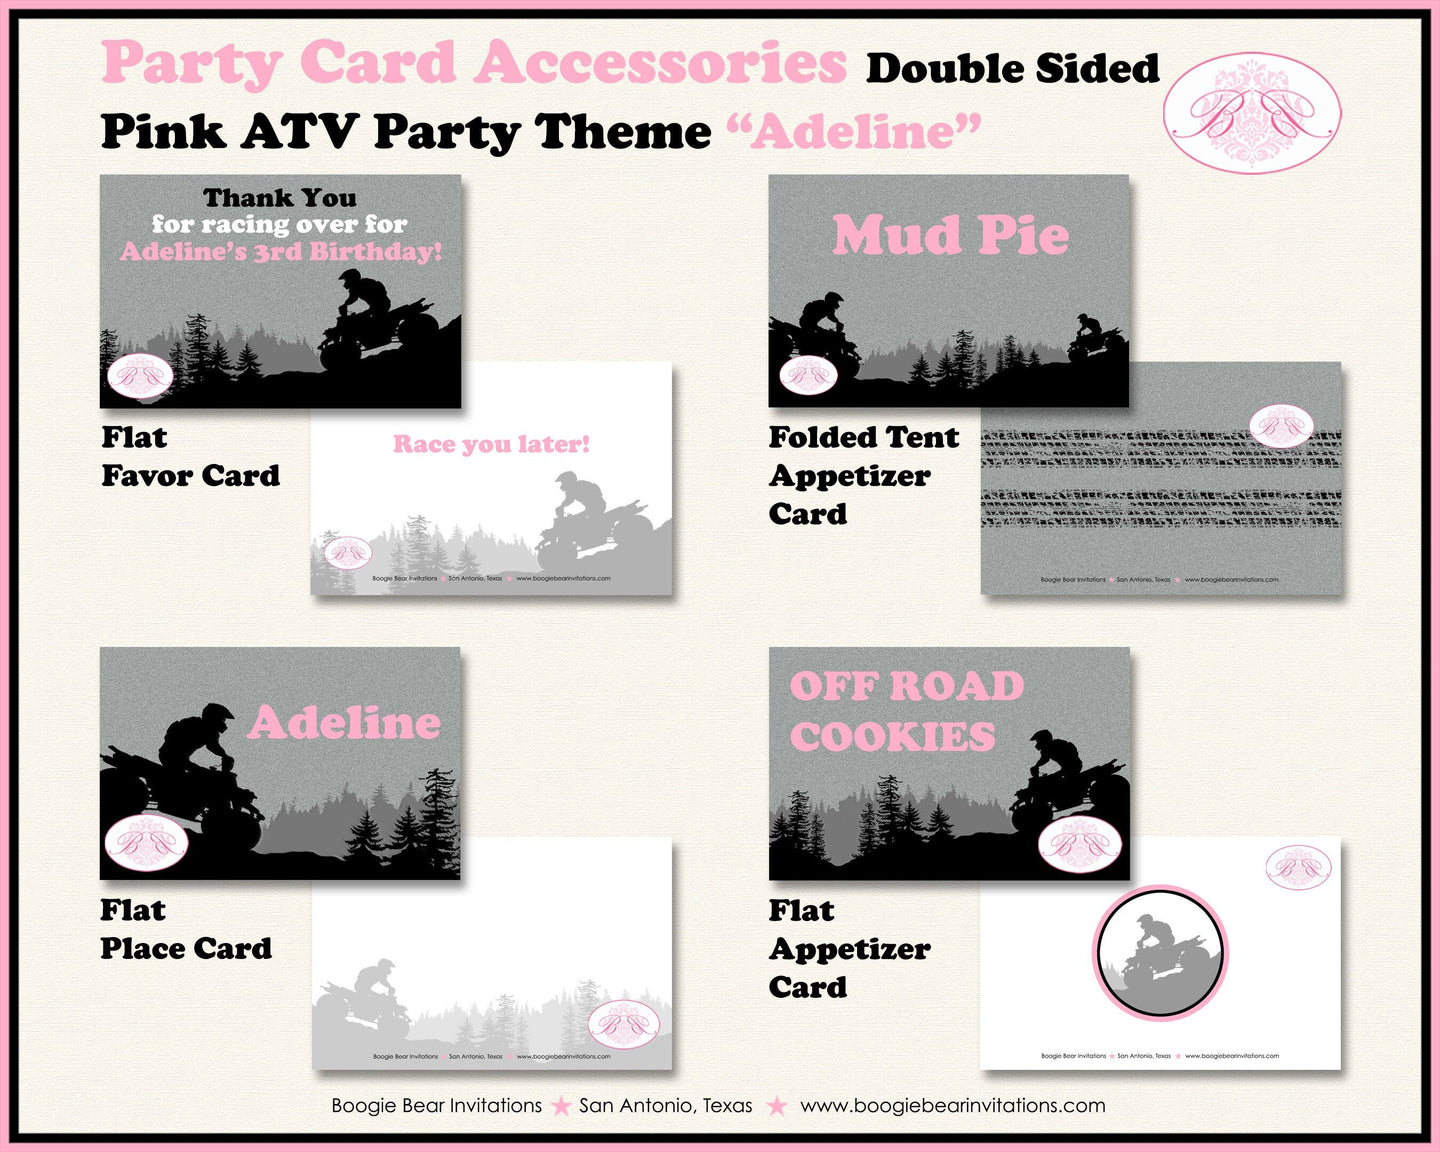 Pink ATV Birthday Party Favor Card Tent Appetizer Place Black All Terrain Vehicle Quad 4 Wheeler Girl Boogie Bear Invitations Adeline Theme